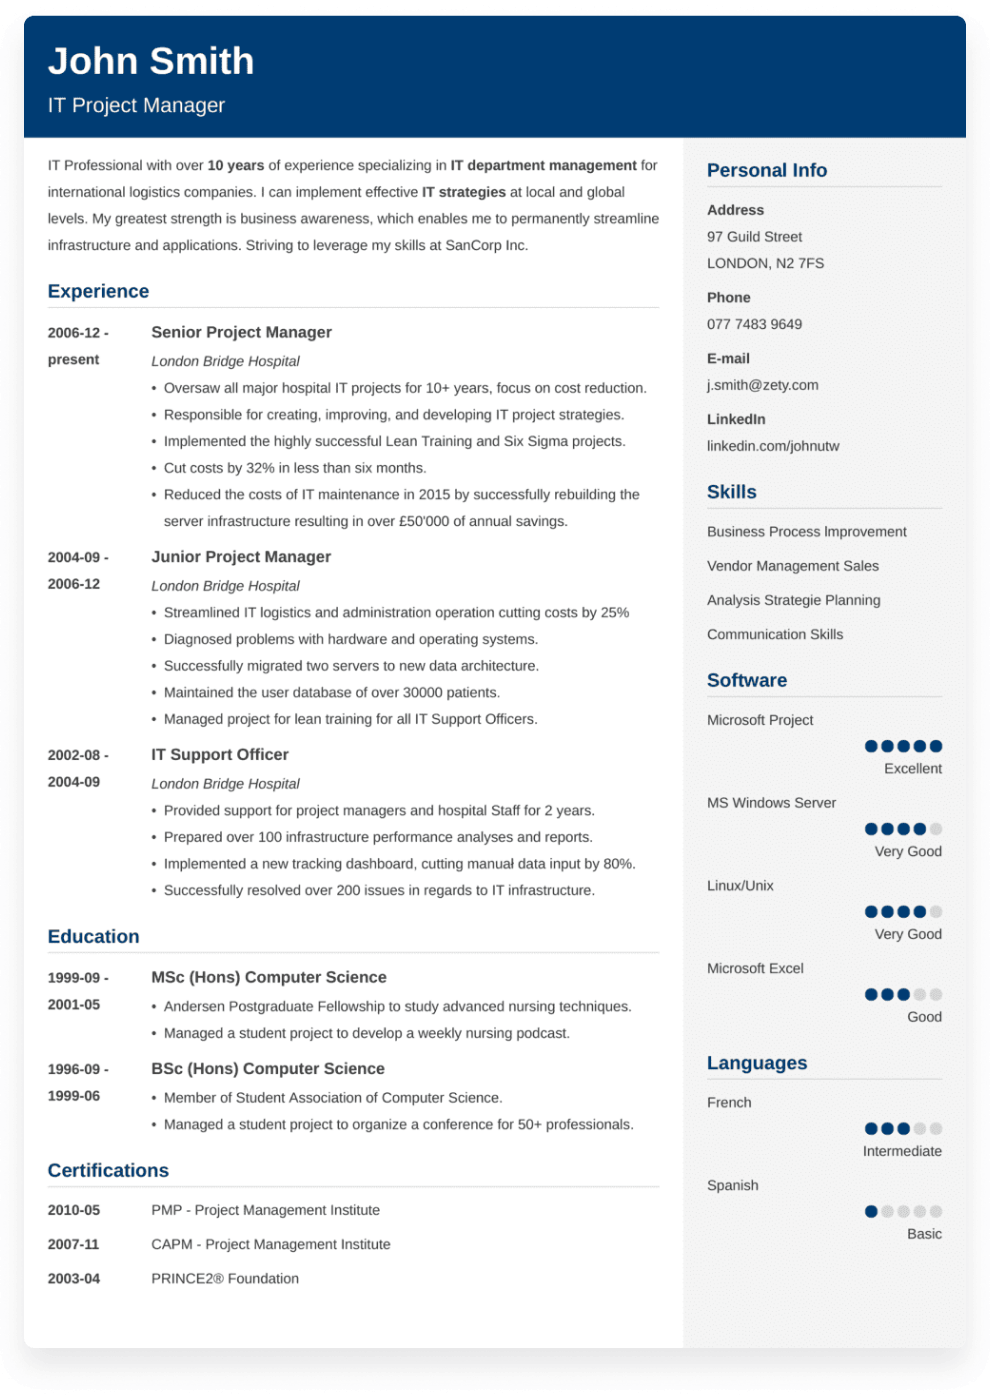 CV made with ResumeLab resume builder. Cubic Template.